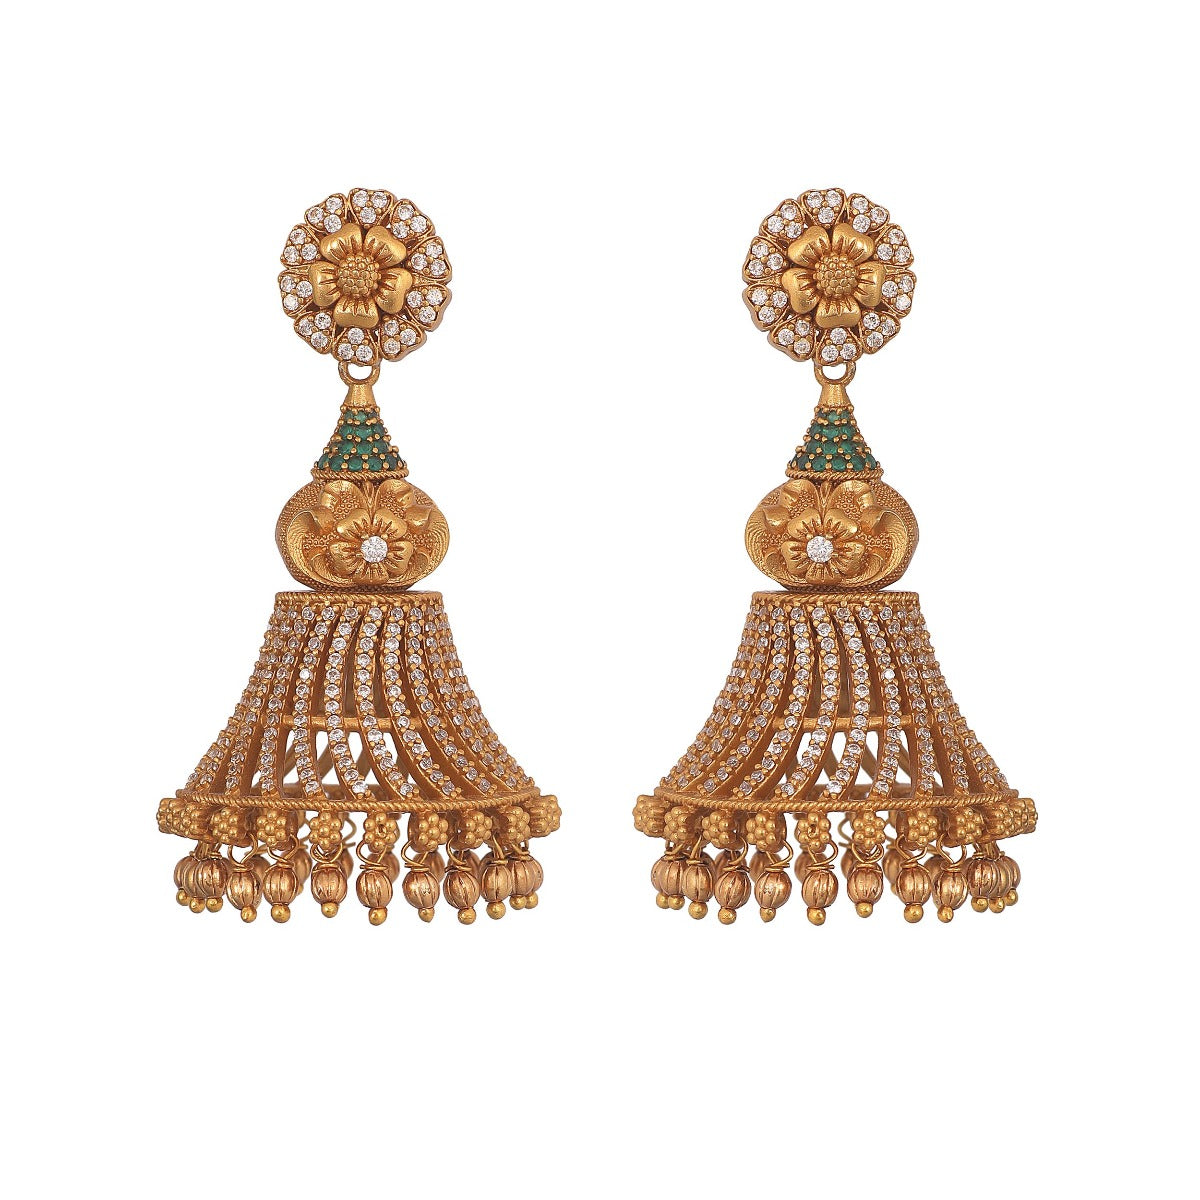 Update more than 78 antique earrings jhumka super hot